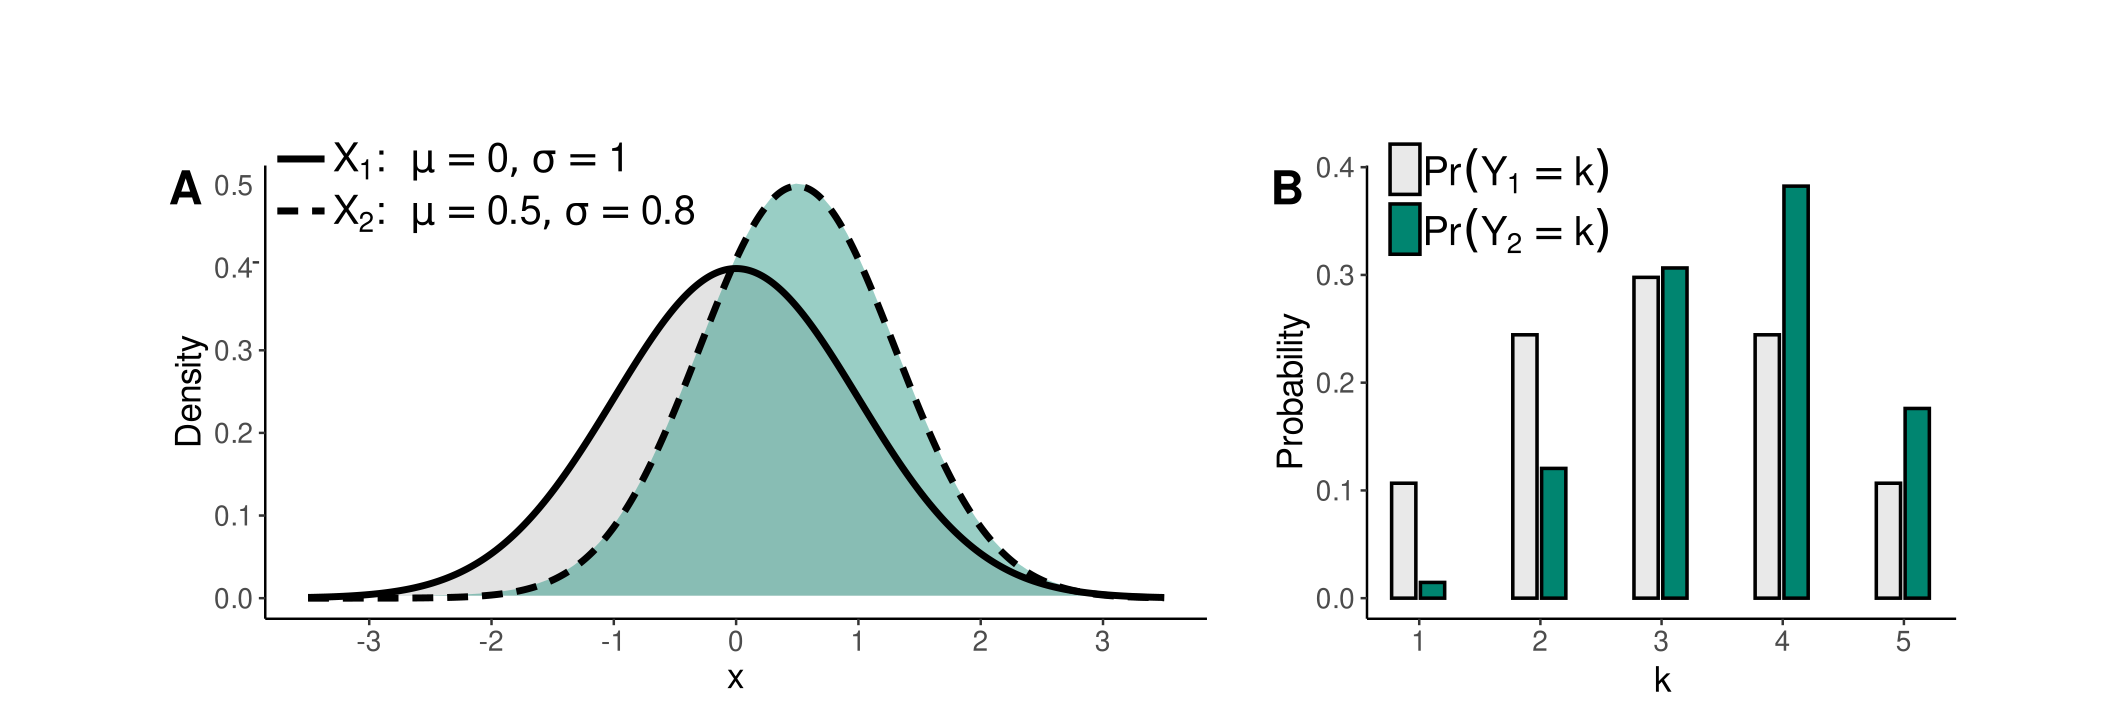 Figure 3: Relationship between normally distributed X and responses Y.